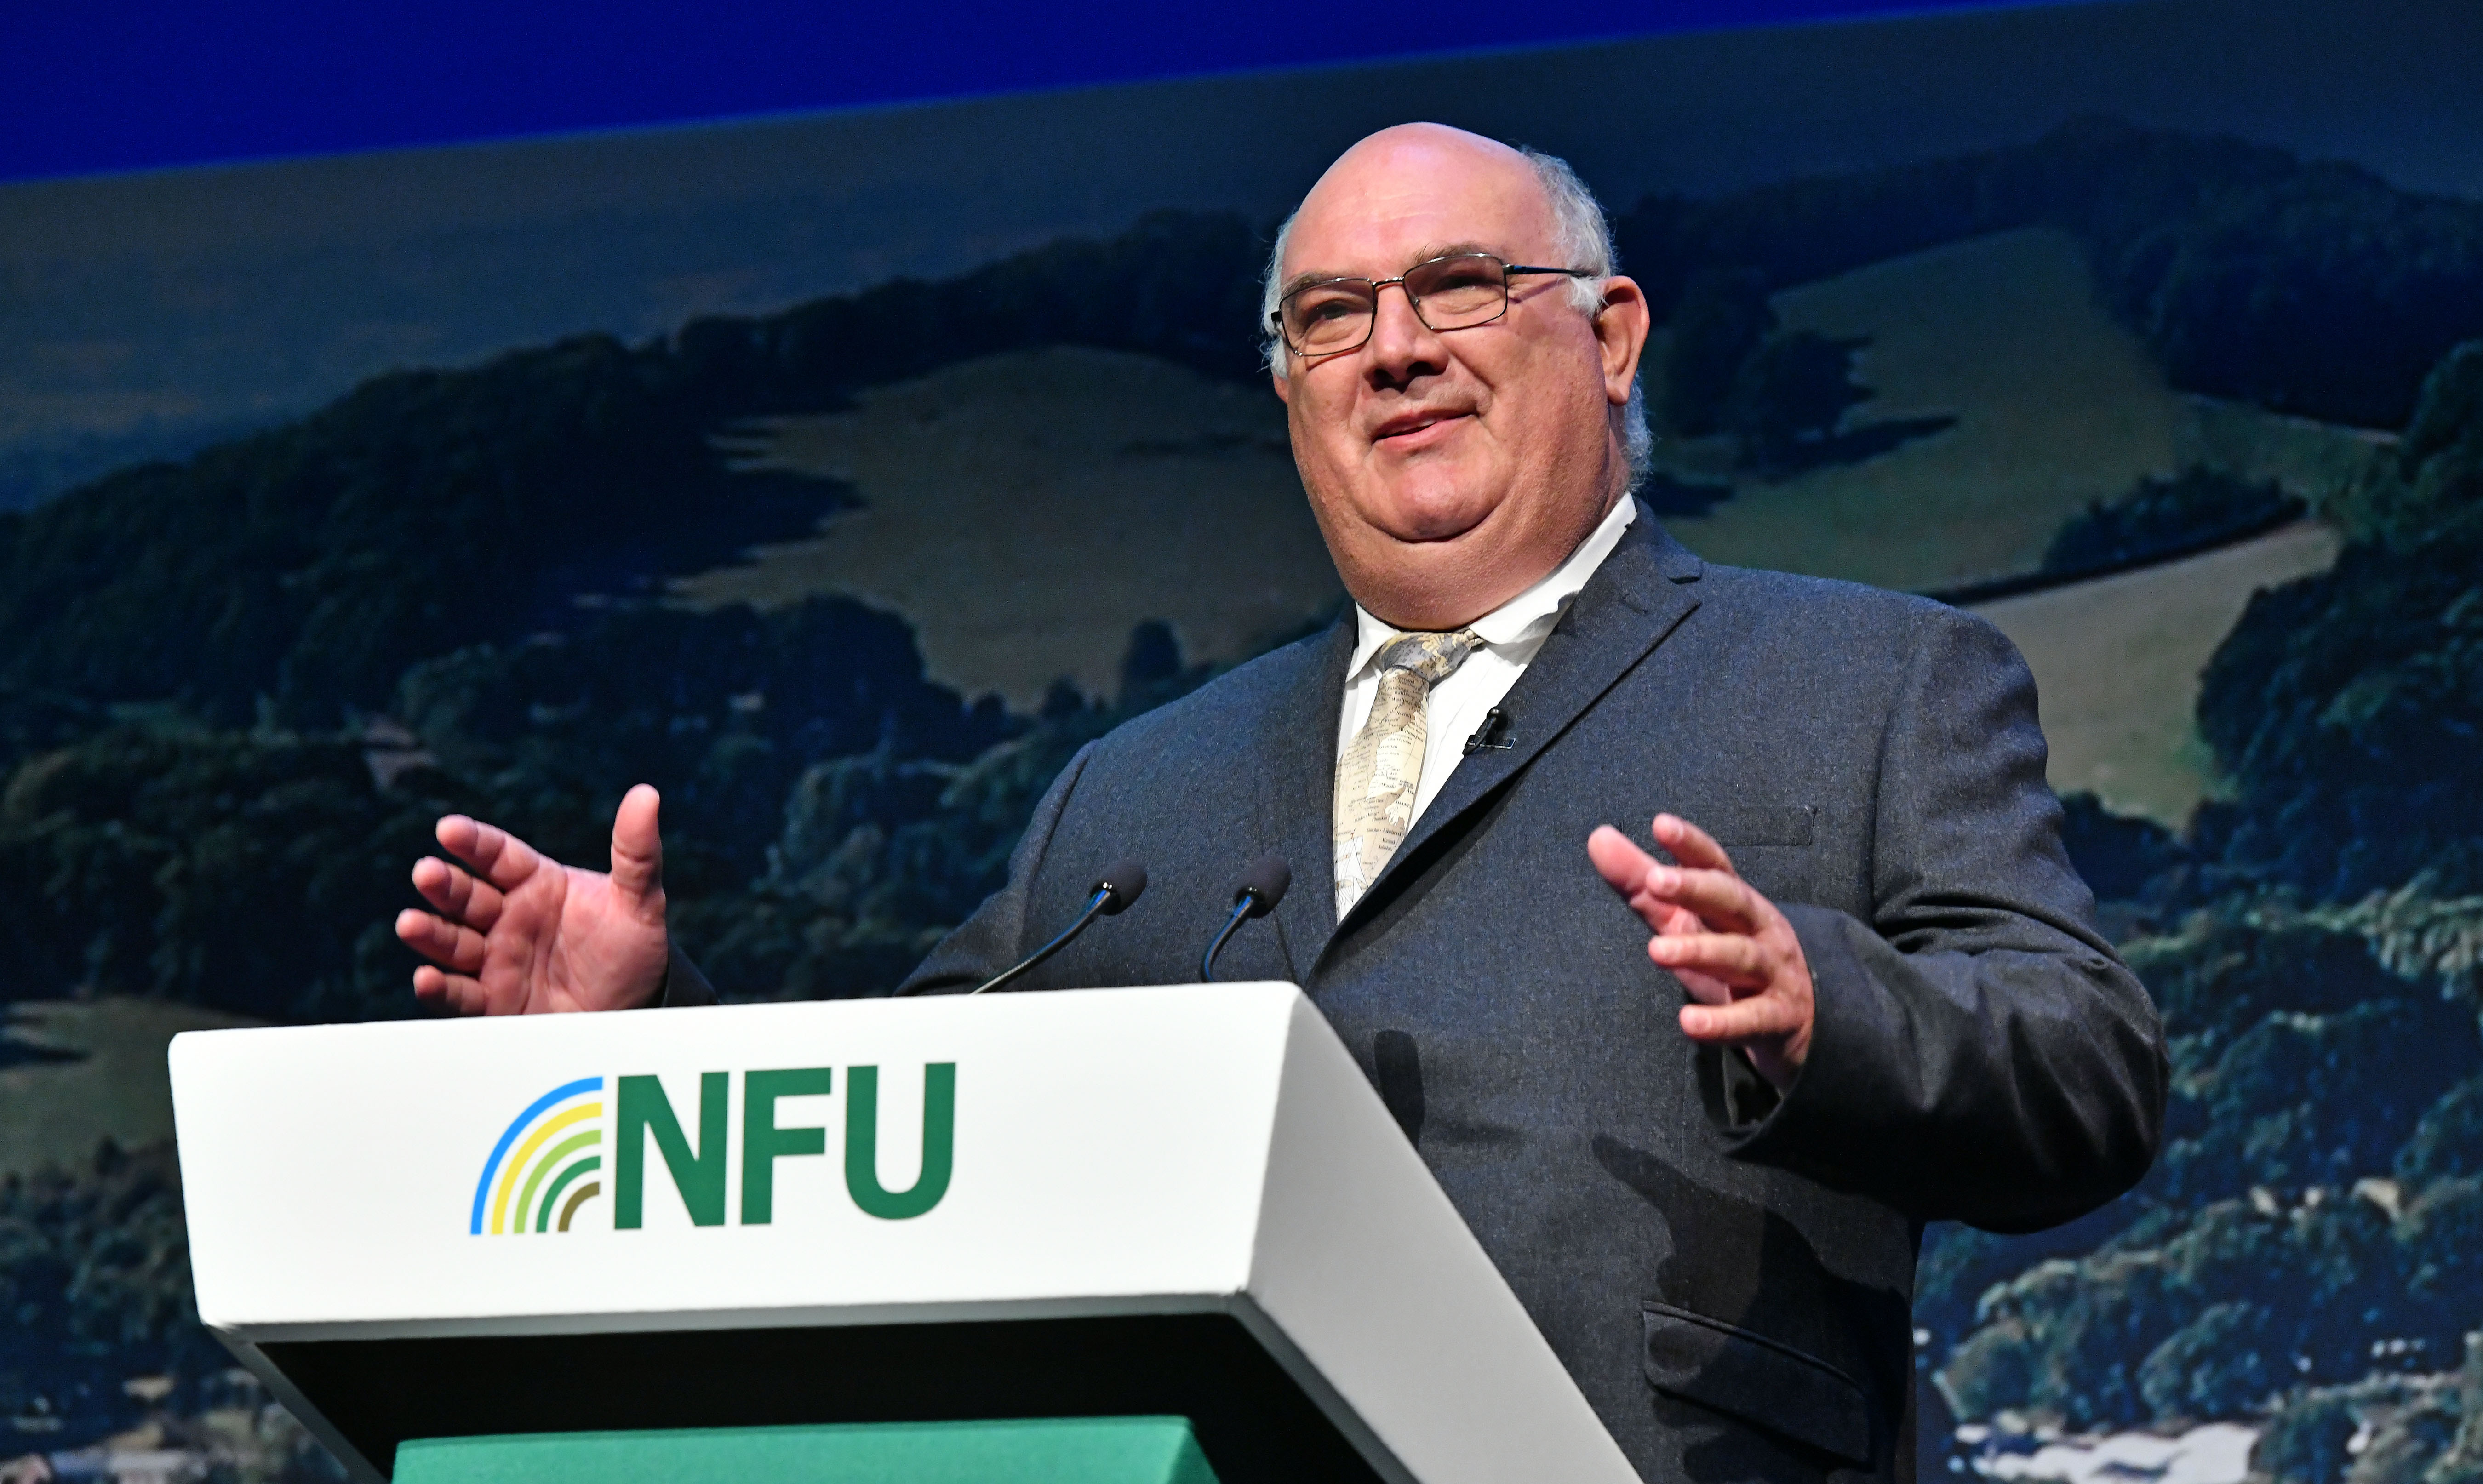 Dr Theo De Jager, President of the World Farmers' Organisation, speaking on day two of NFU Conference 2022